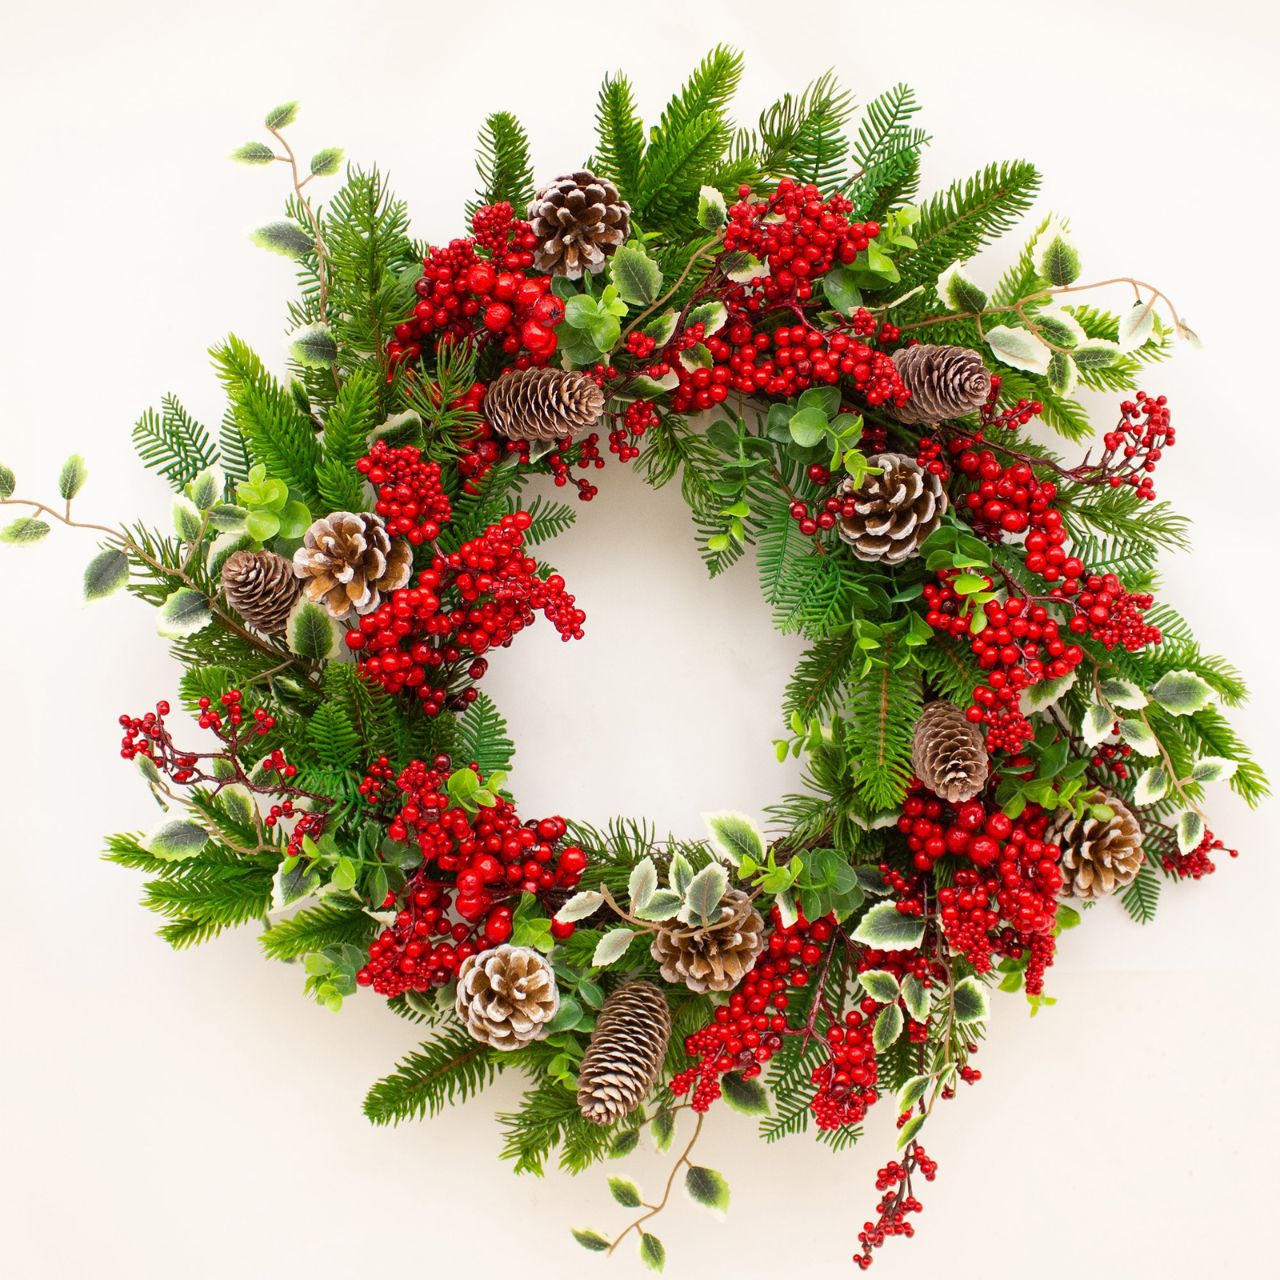 Enchante Festive Gathering Wreath 55 cm  The Christmas Festive Gatherings Wreath is a perfect addition to any celebration. It's crafted with high-quality materials for a long-lasting, eye-catching decoration. Lightweight and durable, it easily hangs to provide a festive touch to your gathering.